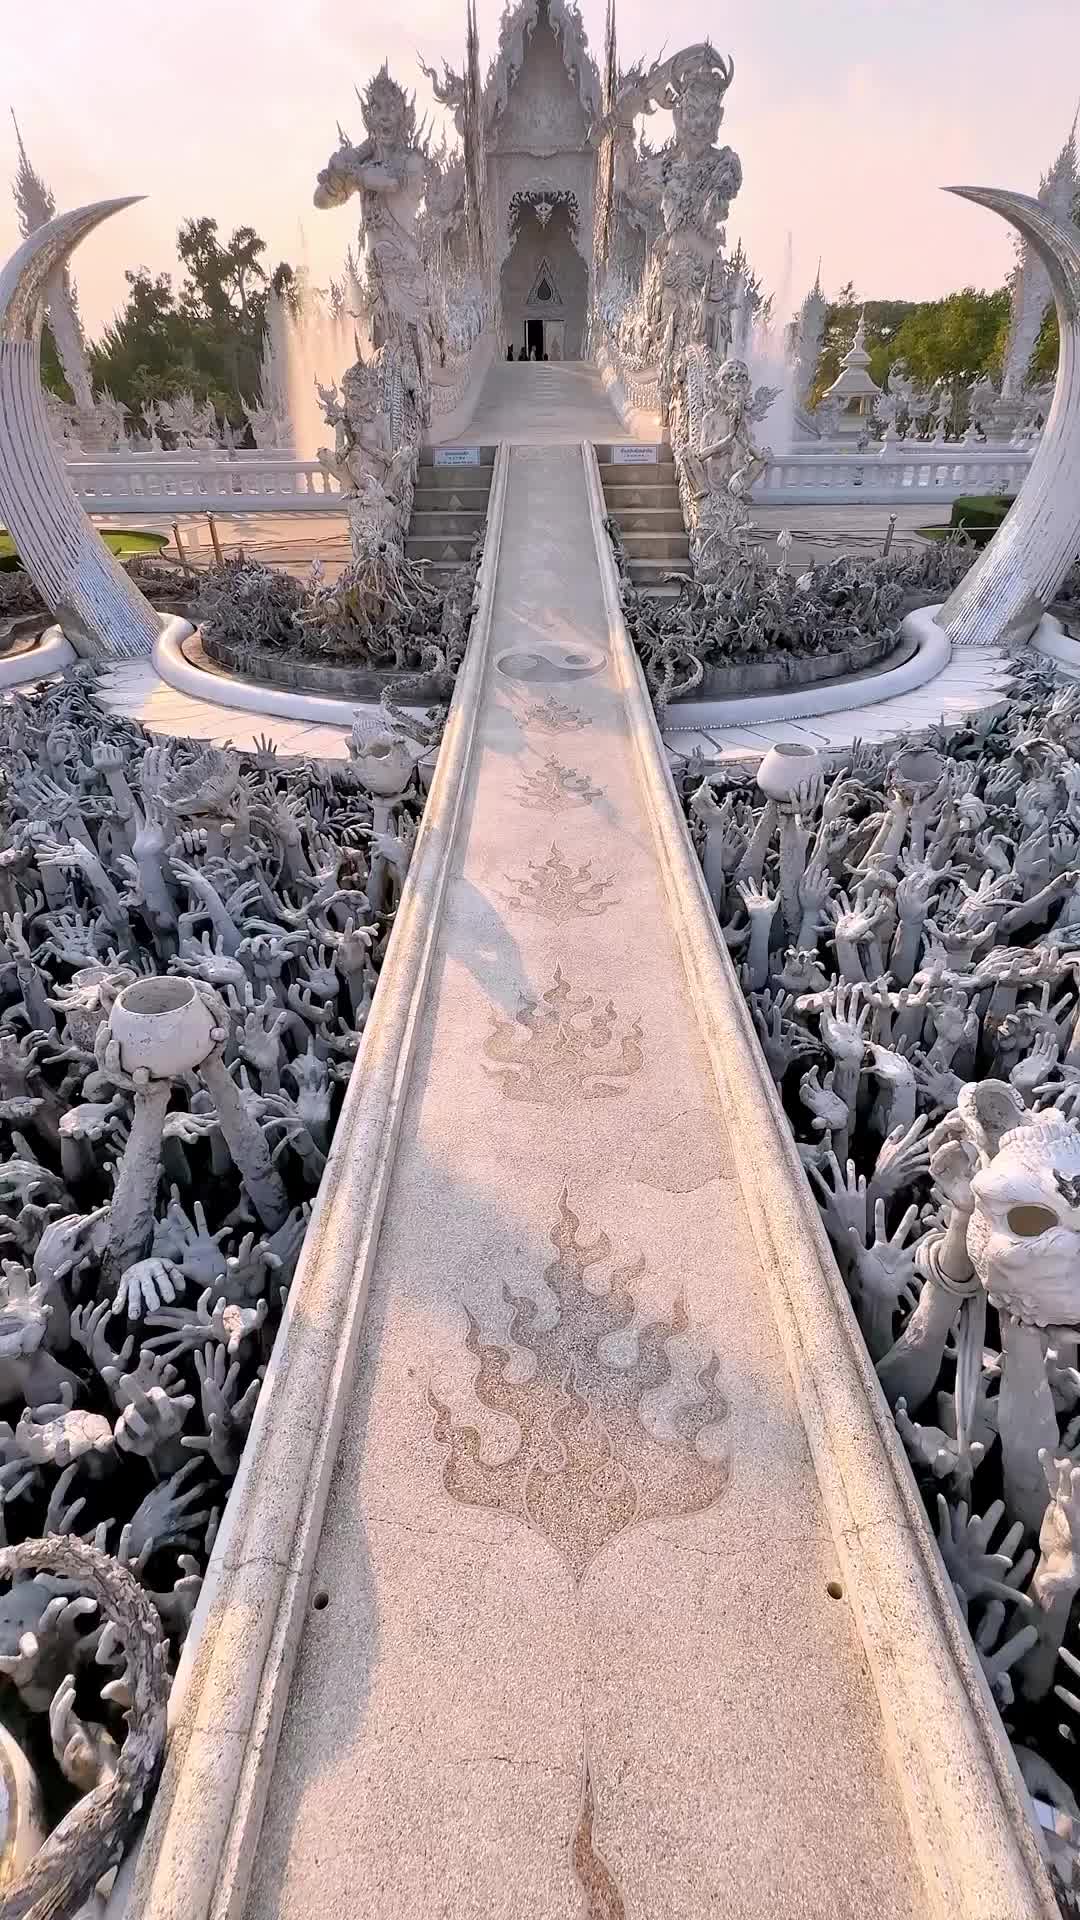 Walk up the Bridge of Rebirth, and have the guardians, Death and Rahu, decide your fate!

A POV of what it’s like to walk through Wat Rong Khun, the hands coming out of the moat are intimidating but beckon you to take a closer look 👀

This is a rare moment where there isn’t a line of people on the bridge, either be the first in line or come at closing, because you can’t go back down the bridge!  I heard it’s bad luck?  But also maybe they just don’t want people going back and forth, if so I may have a few years bad luck 😅

#watrongkhun #chiangrai #chiangraithailand #thailandtemple #thailandinsider #visitthailand
#adventureisoutthere #bestplacestogo #beautifuldestinations #bestvacations #gltlove #explorerbabes #girlswhotravel #womentravel #travelinspo #girlsthatwander #travelgirls #girlsborntotravel #travelandleisure #travelreels #vacationgoals #travelgoals #postcardplaces